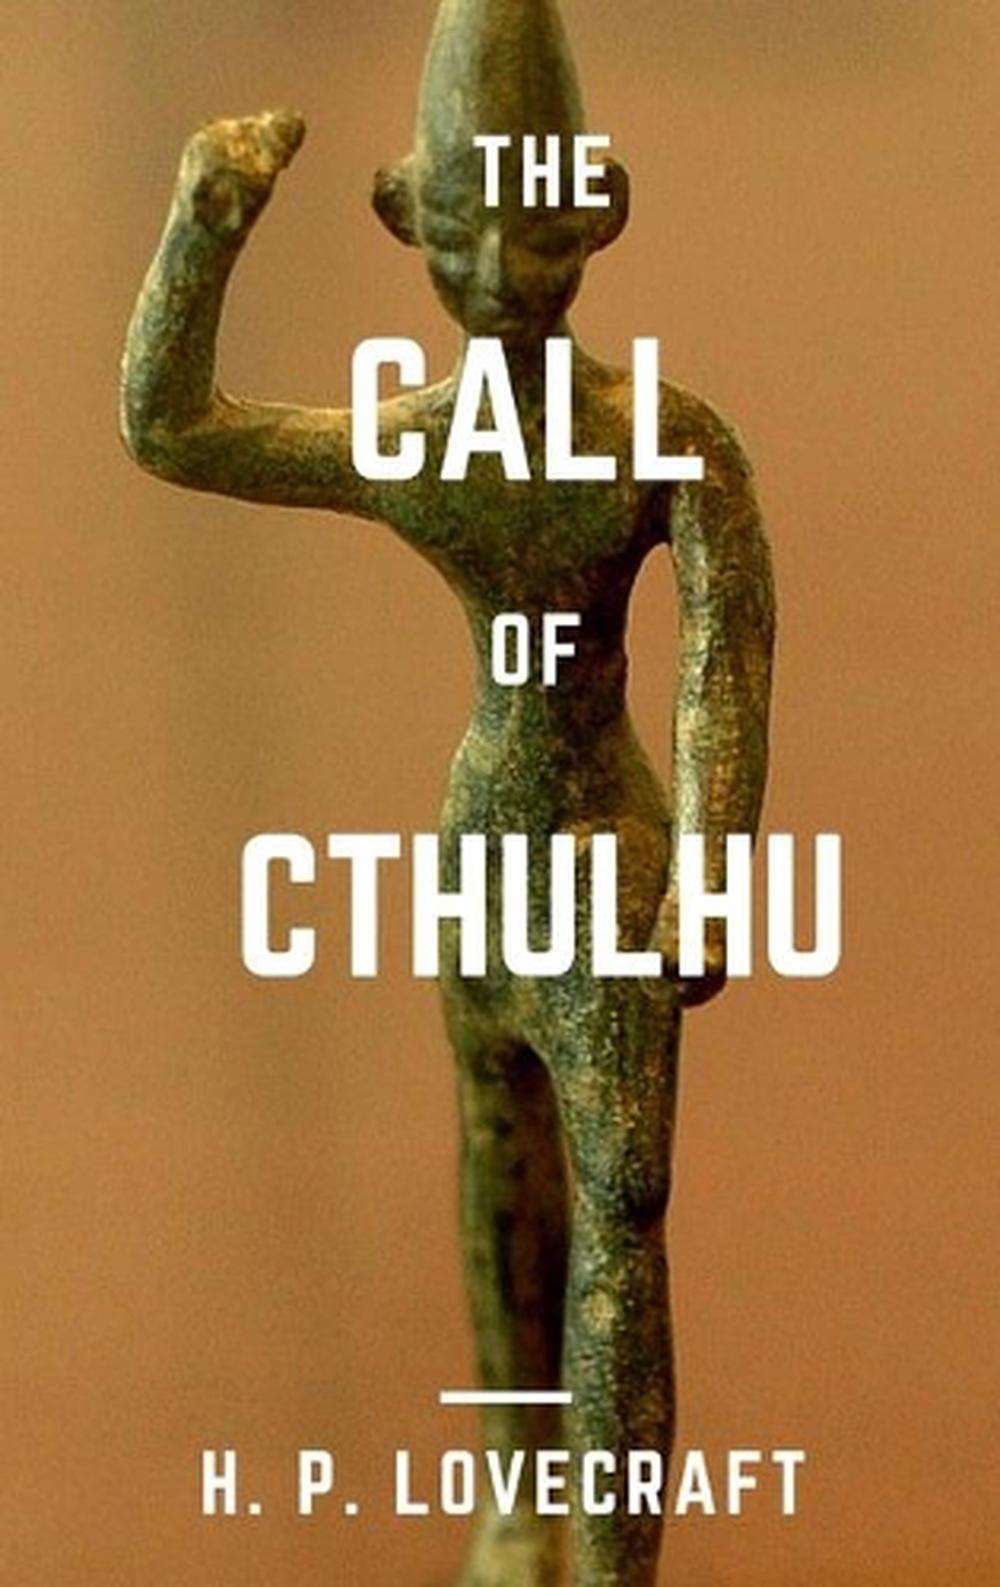 weird tales 1928 the call of cthulhu